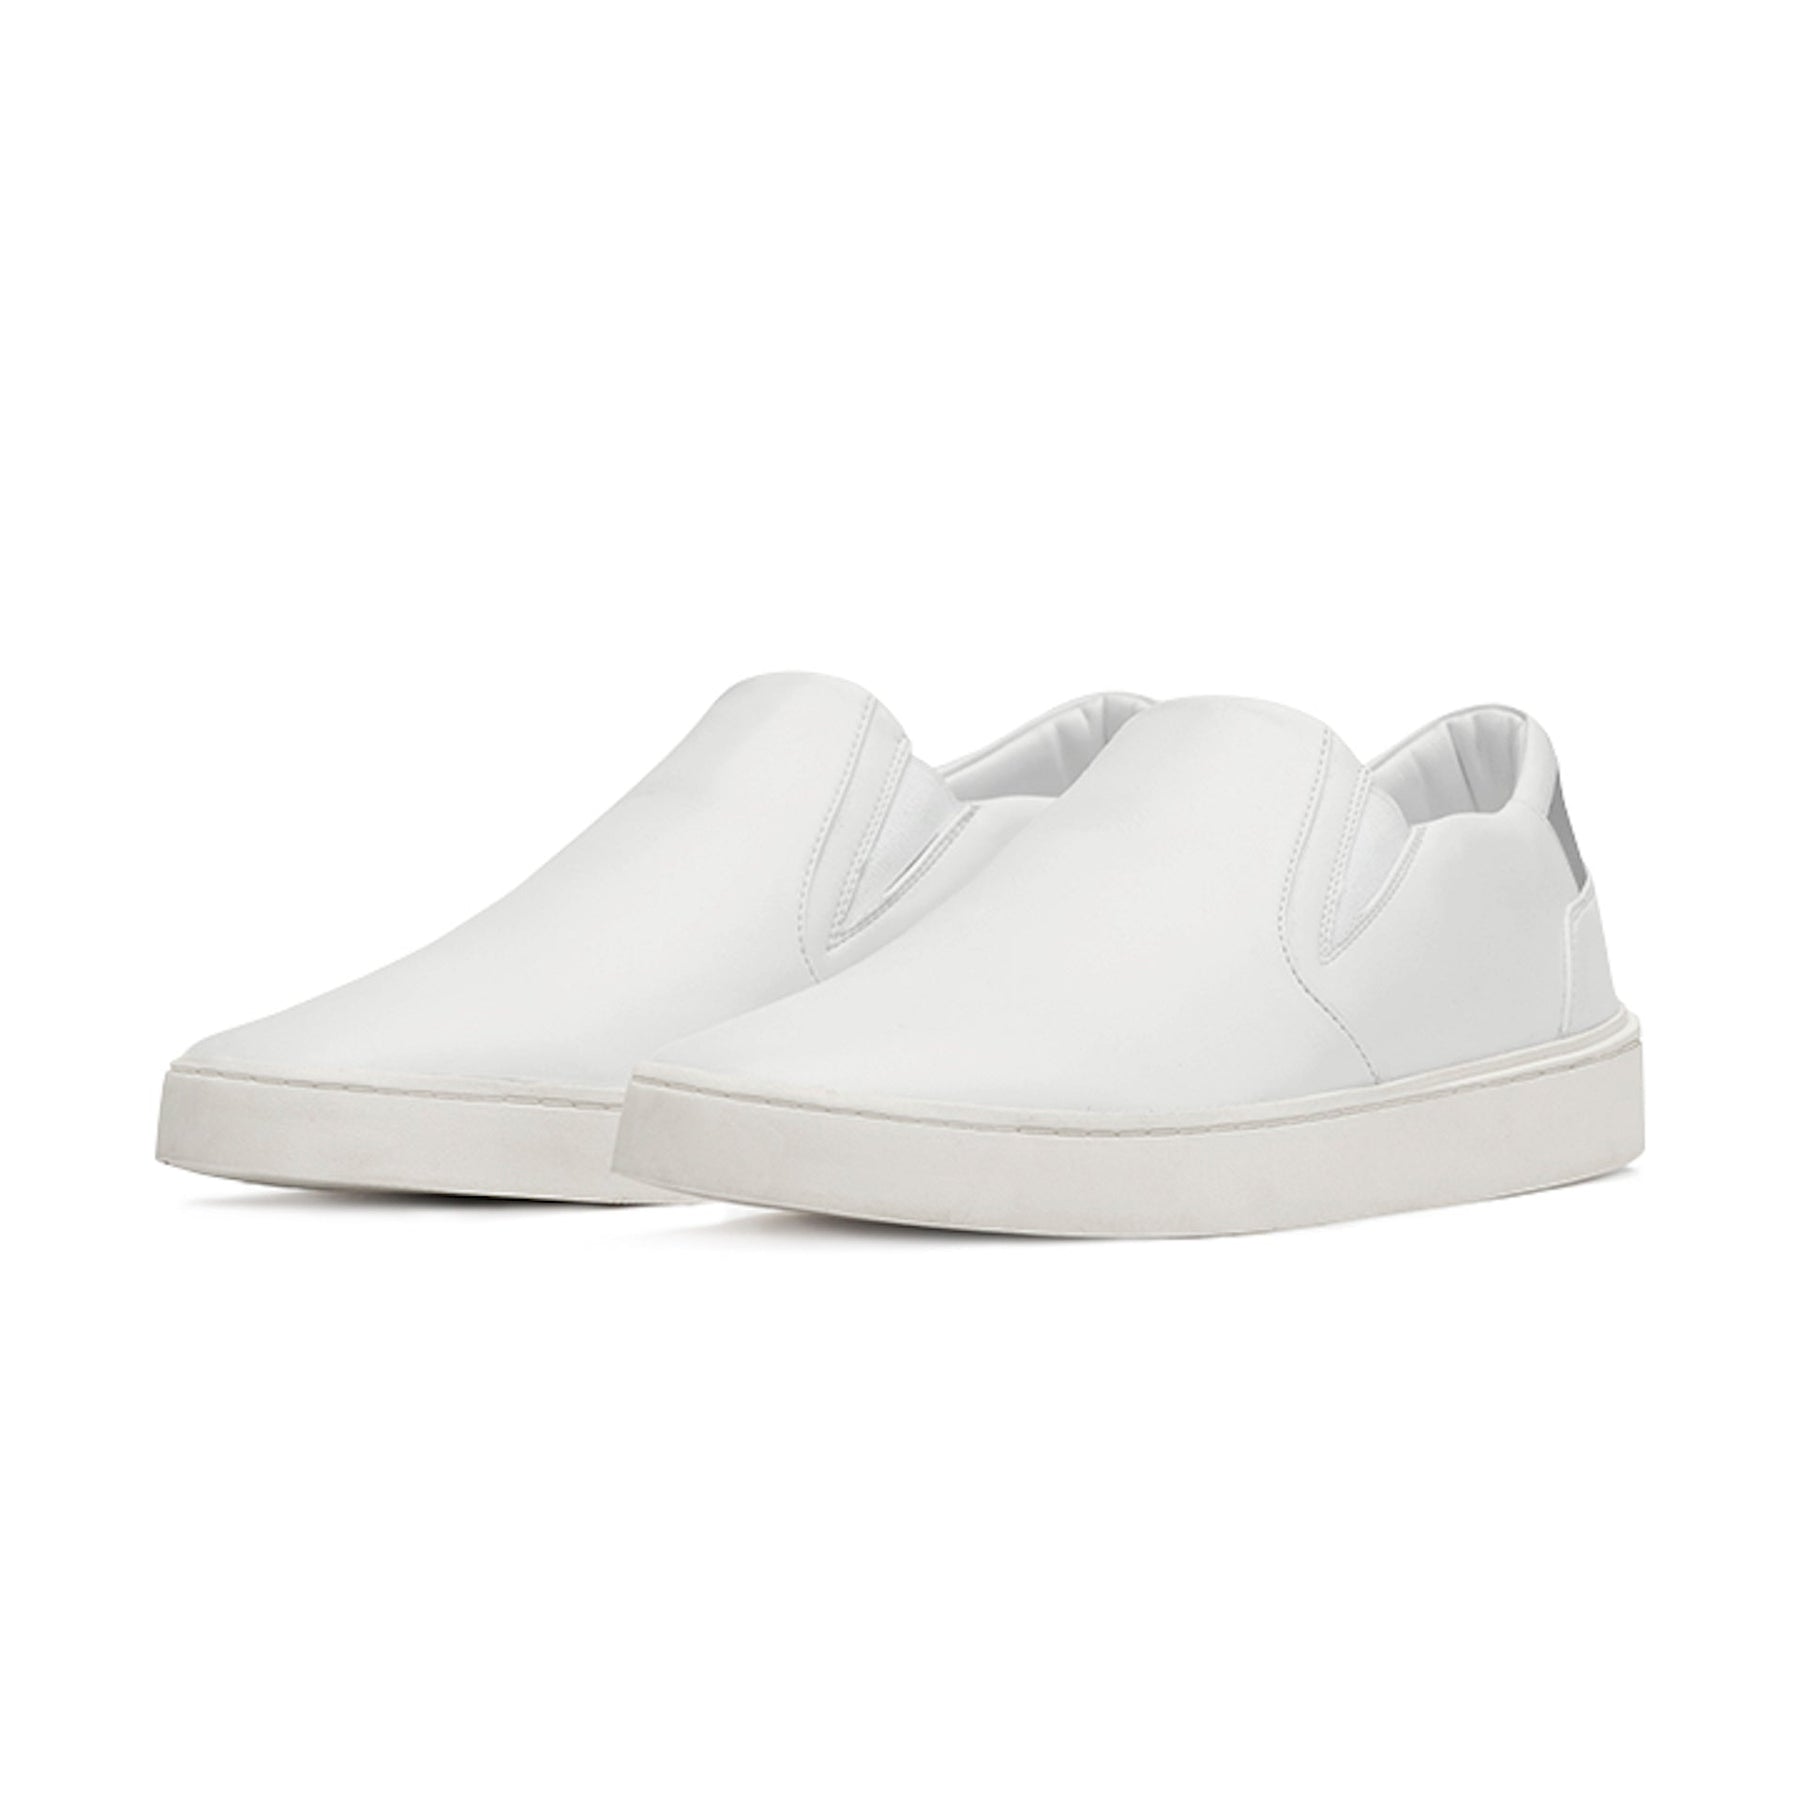 classic white ethically made slip on sneakers 